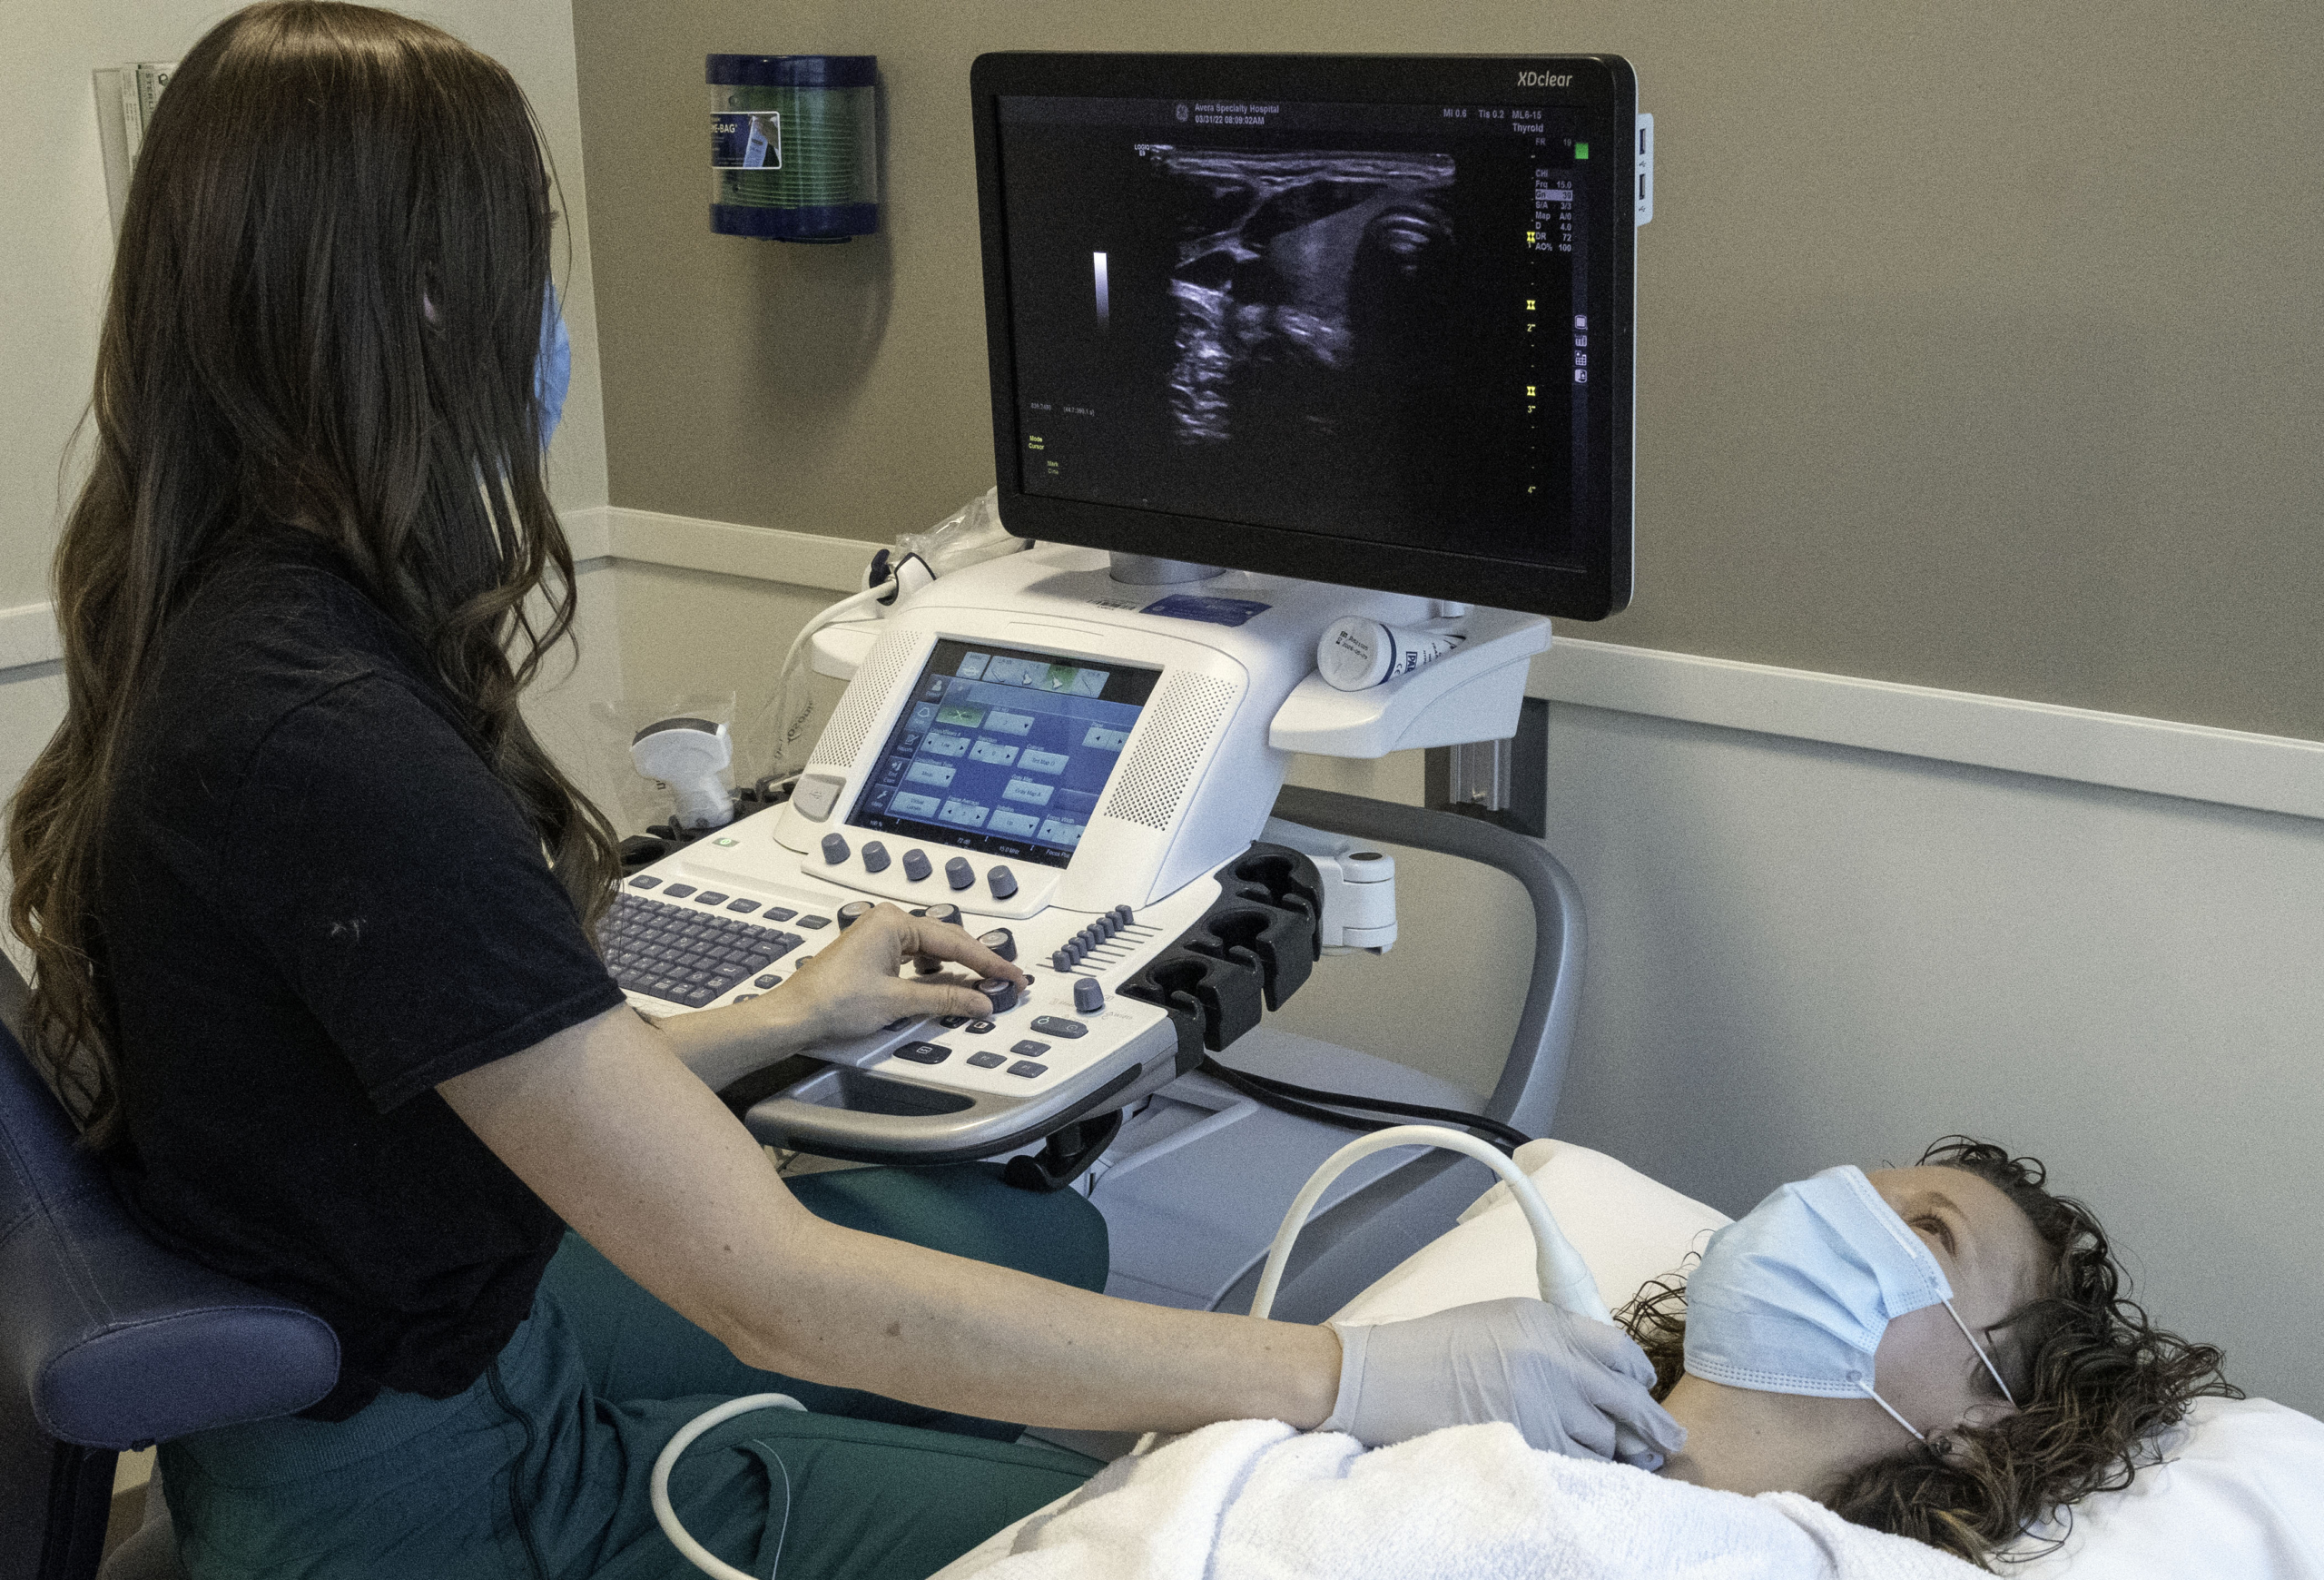 Helmsley Charitable Trust Grants More than $26.4M to Fund Nearly 200 Ultrasound Imaging Devices Across Minnesota and Train Sonography Workforce